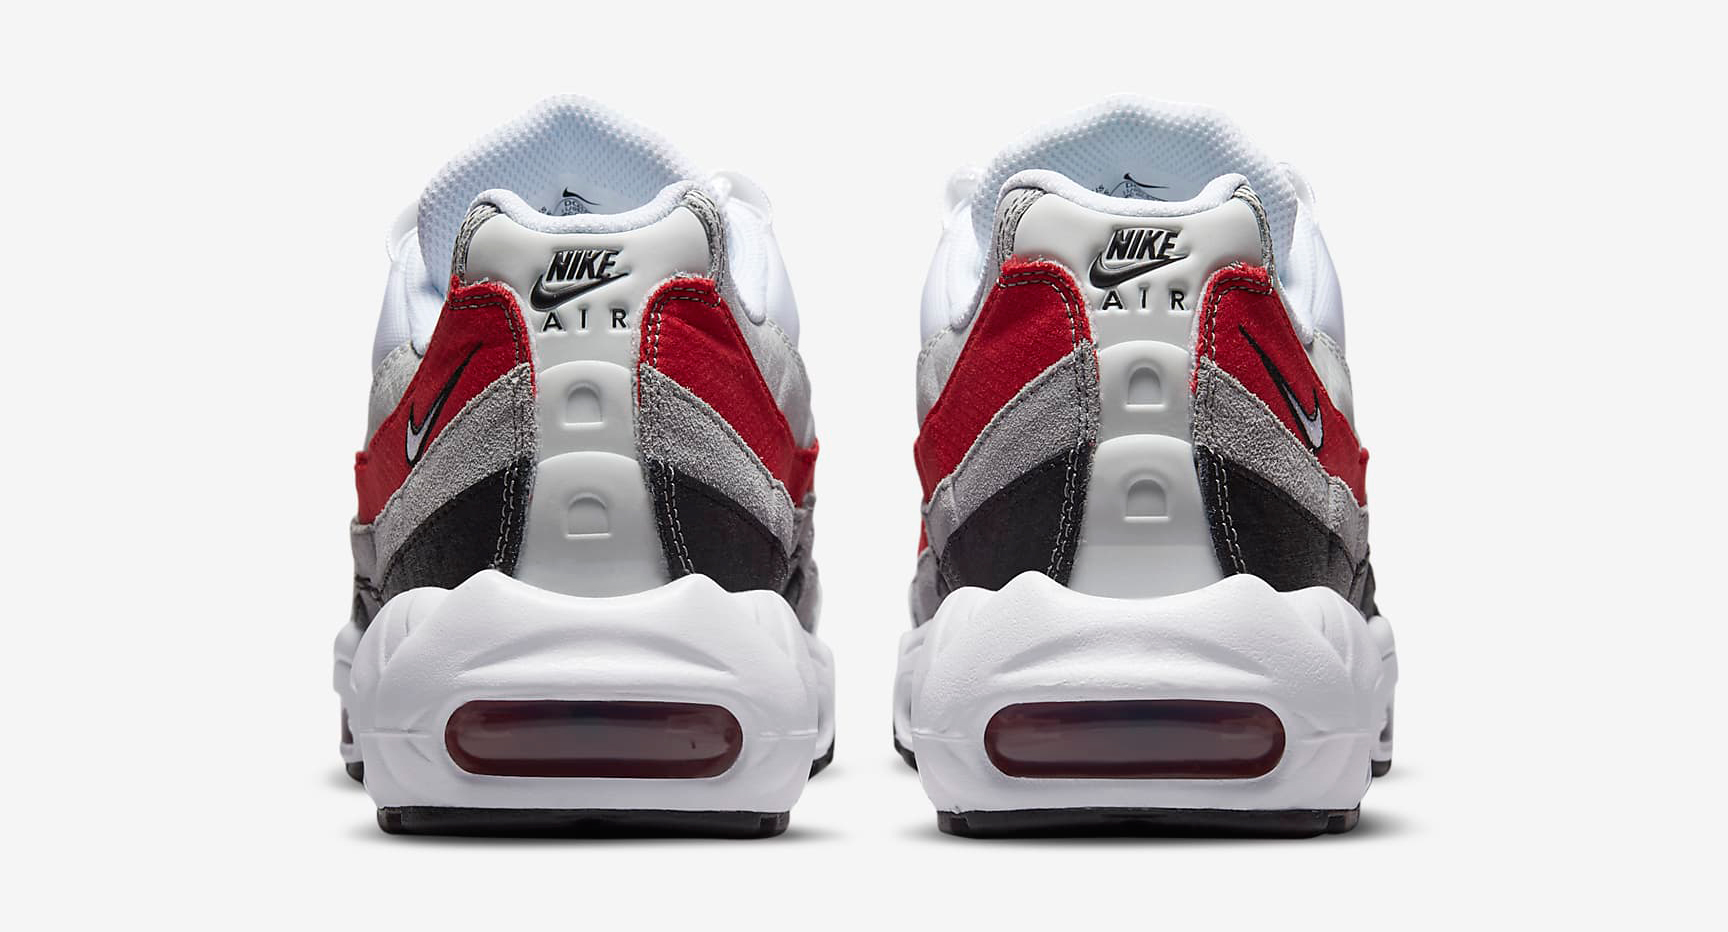 nike-air-max-95-prototype-white-black-particle-grey-varsity-red-release-date-5